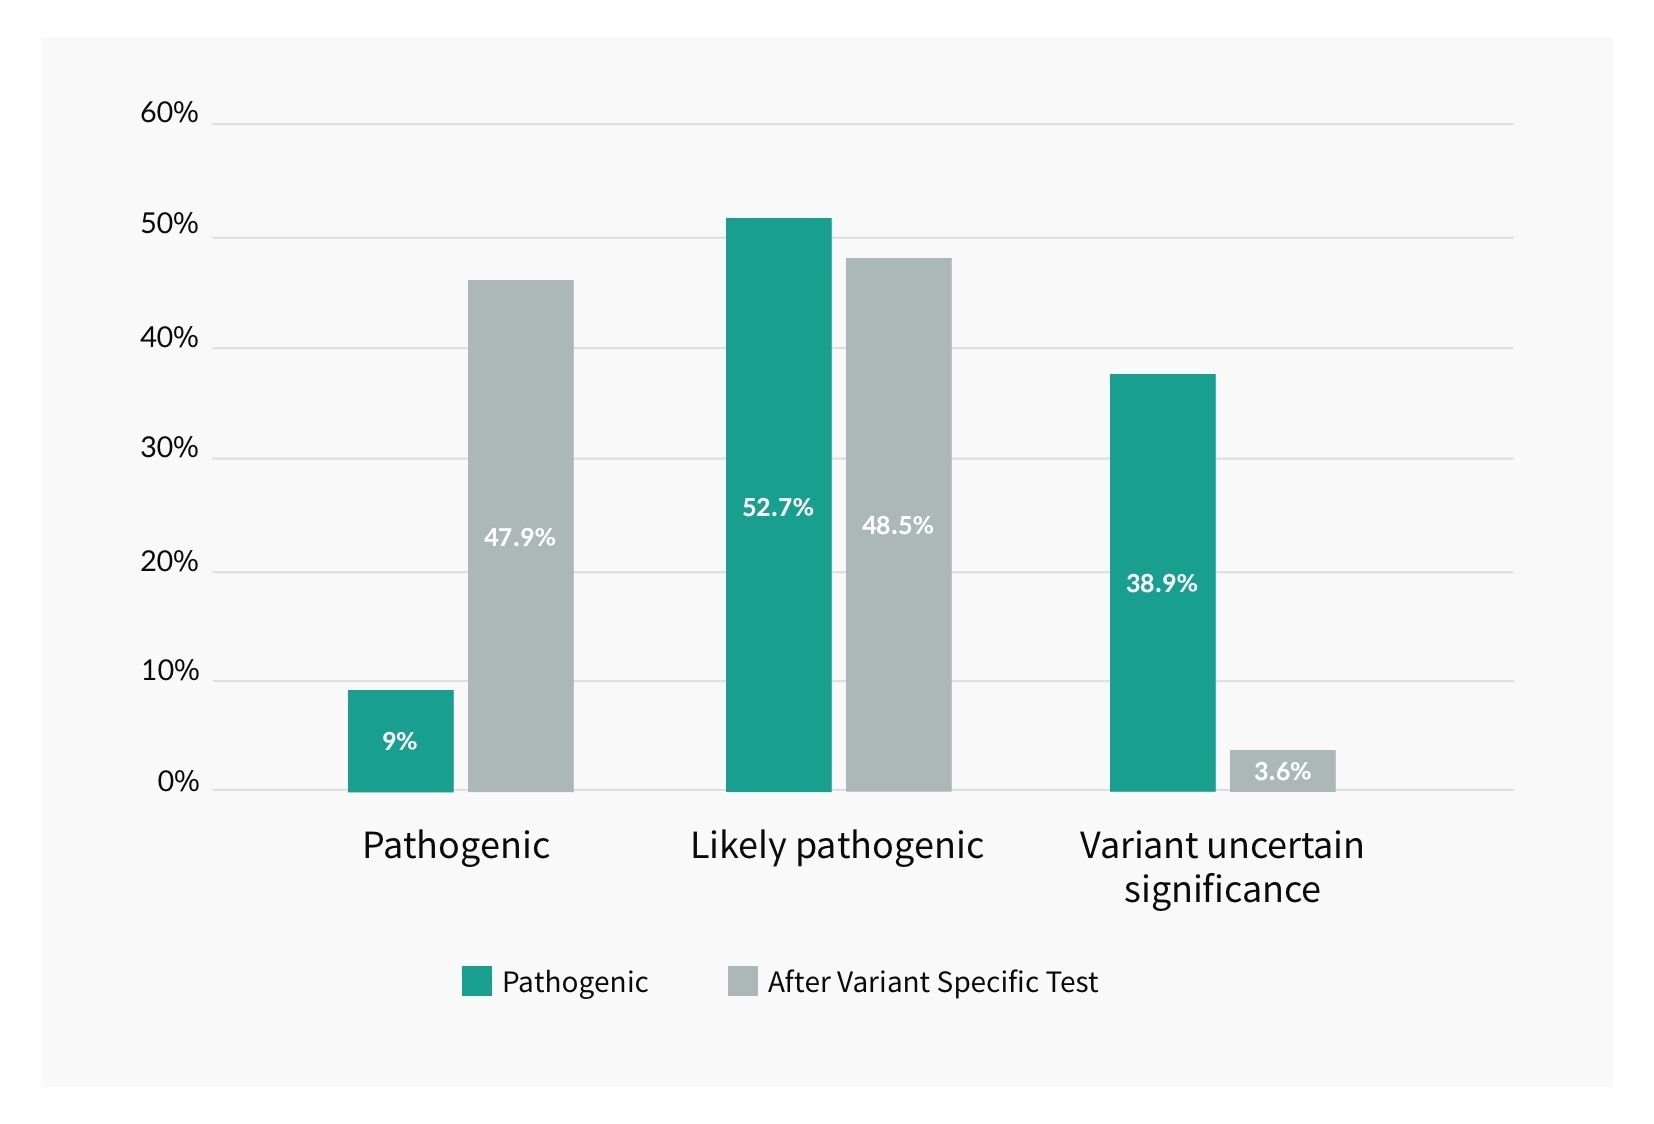 Figure 1. Distribution of the probability of pathogenicity of identified variants before Variant Specific Testing and after Variant Specific Testing